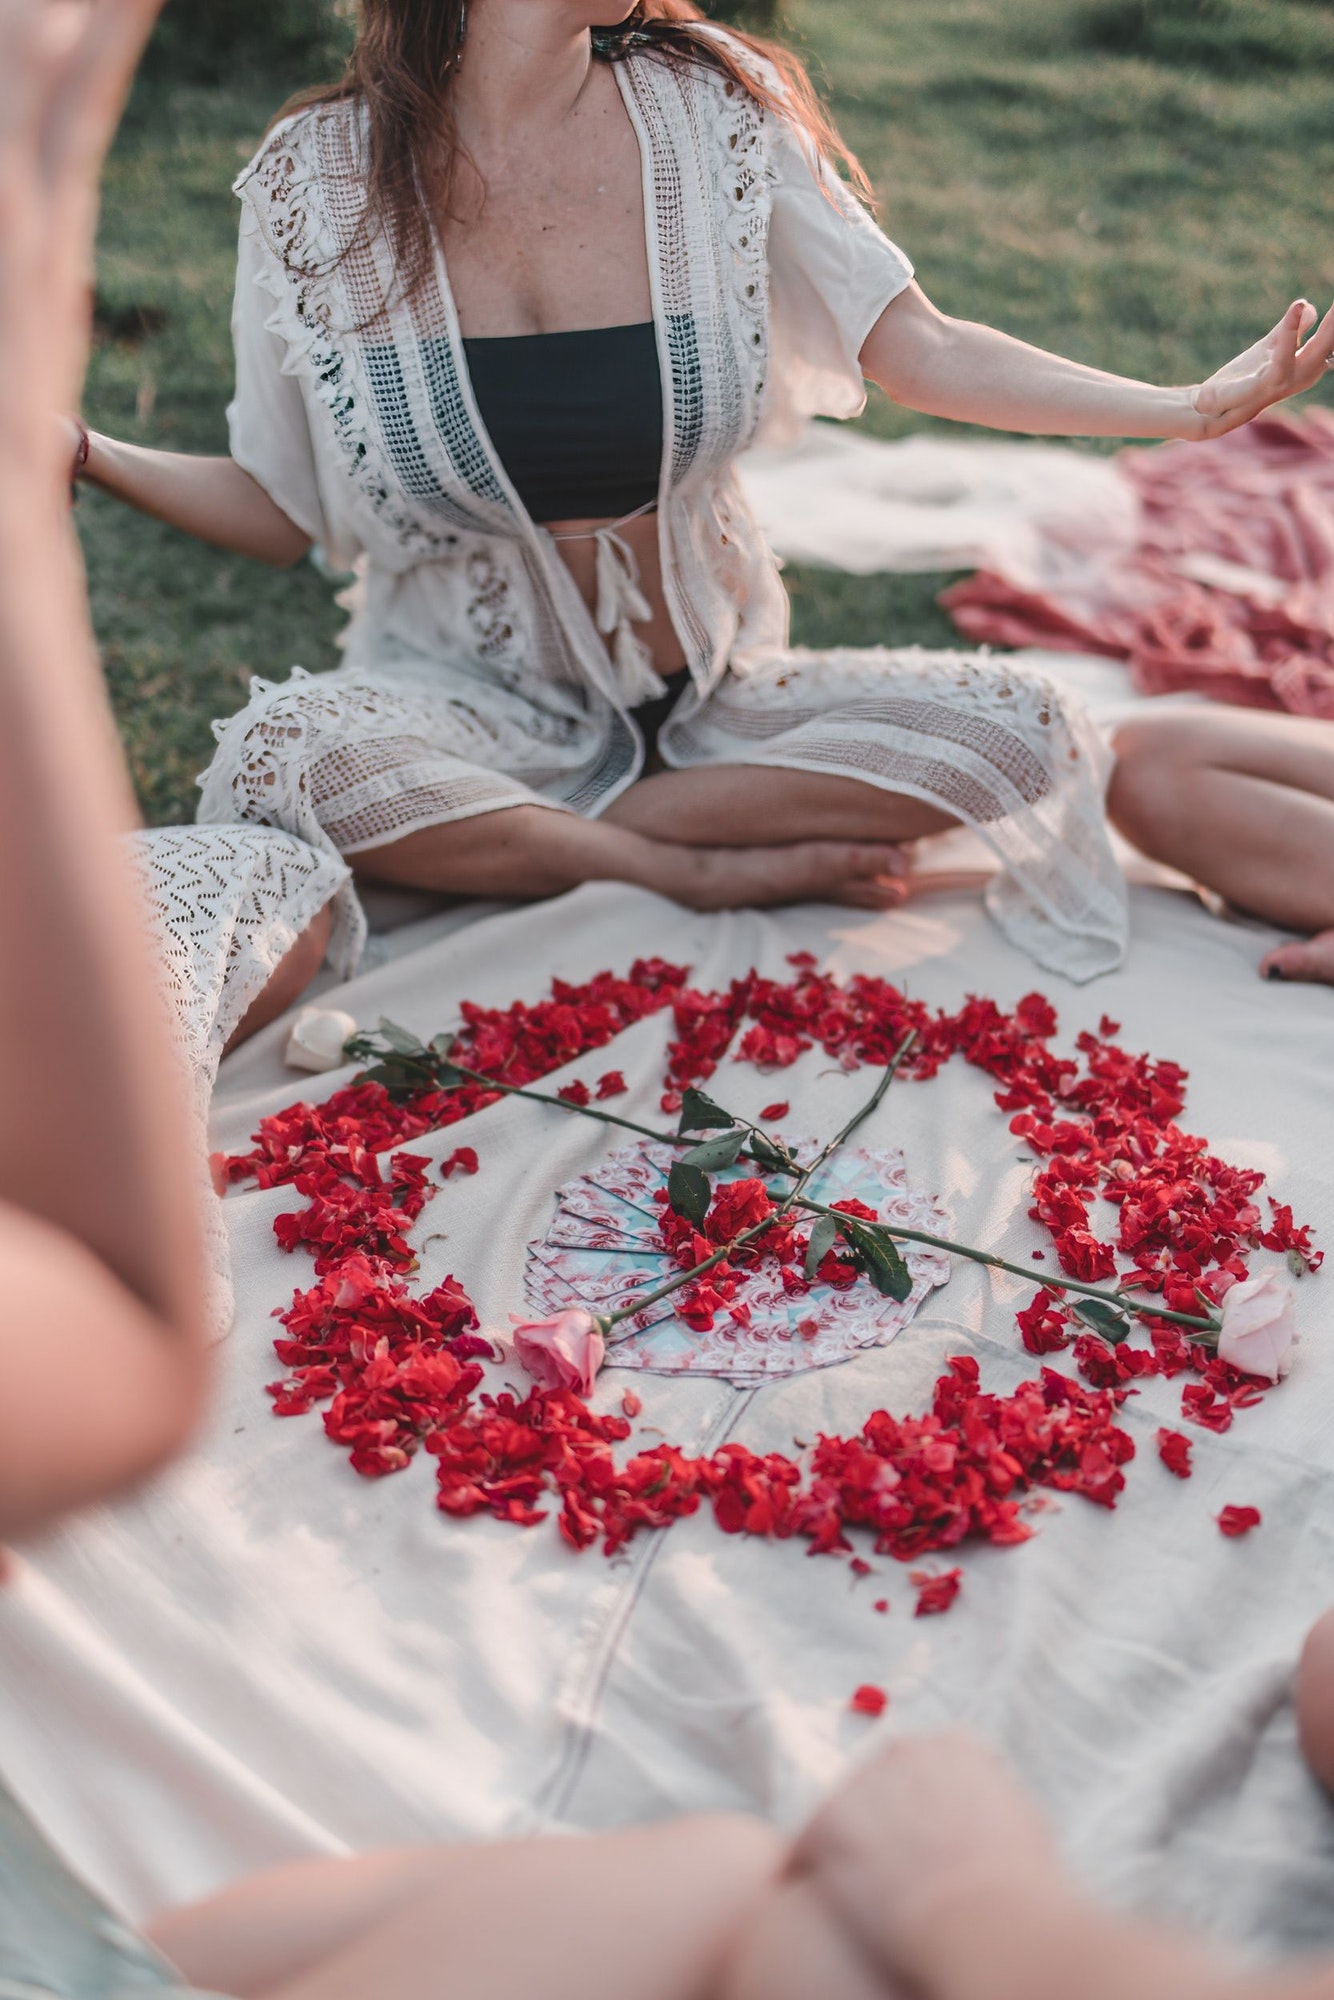 Group of female friends having fun making love spell rituals with rose petals and tarot cards